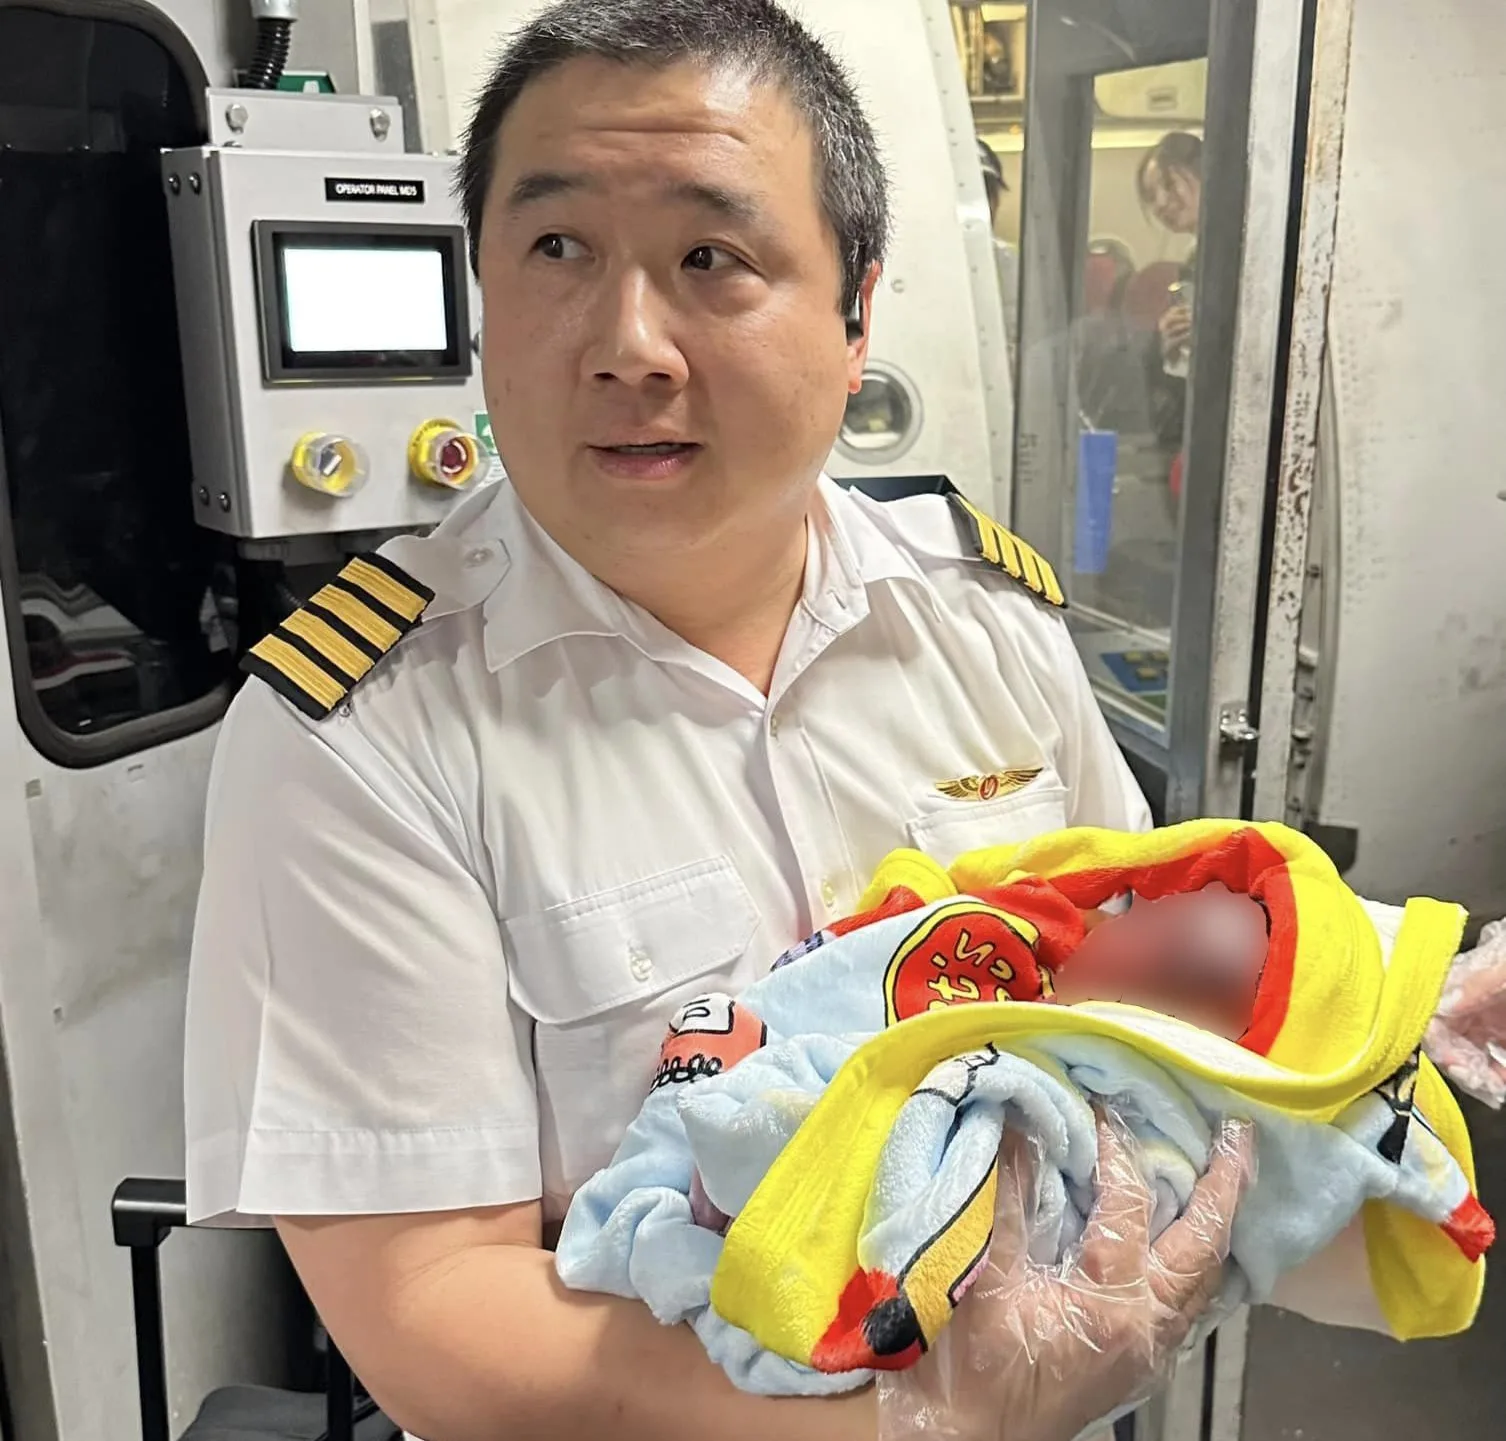 A new mum unexpectedly gave birth mid-flight from Taipei to Bangkok, with Dr. Jakarin Sararnrakskul of VietJet Air assisting in the delivery. The doctor, based at Bangkok International Airport, happily cradled the newborn after the successful birth.